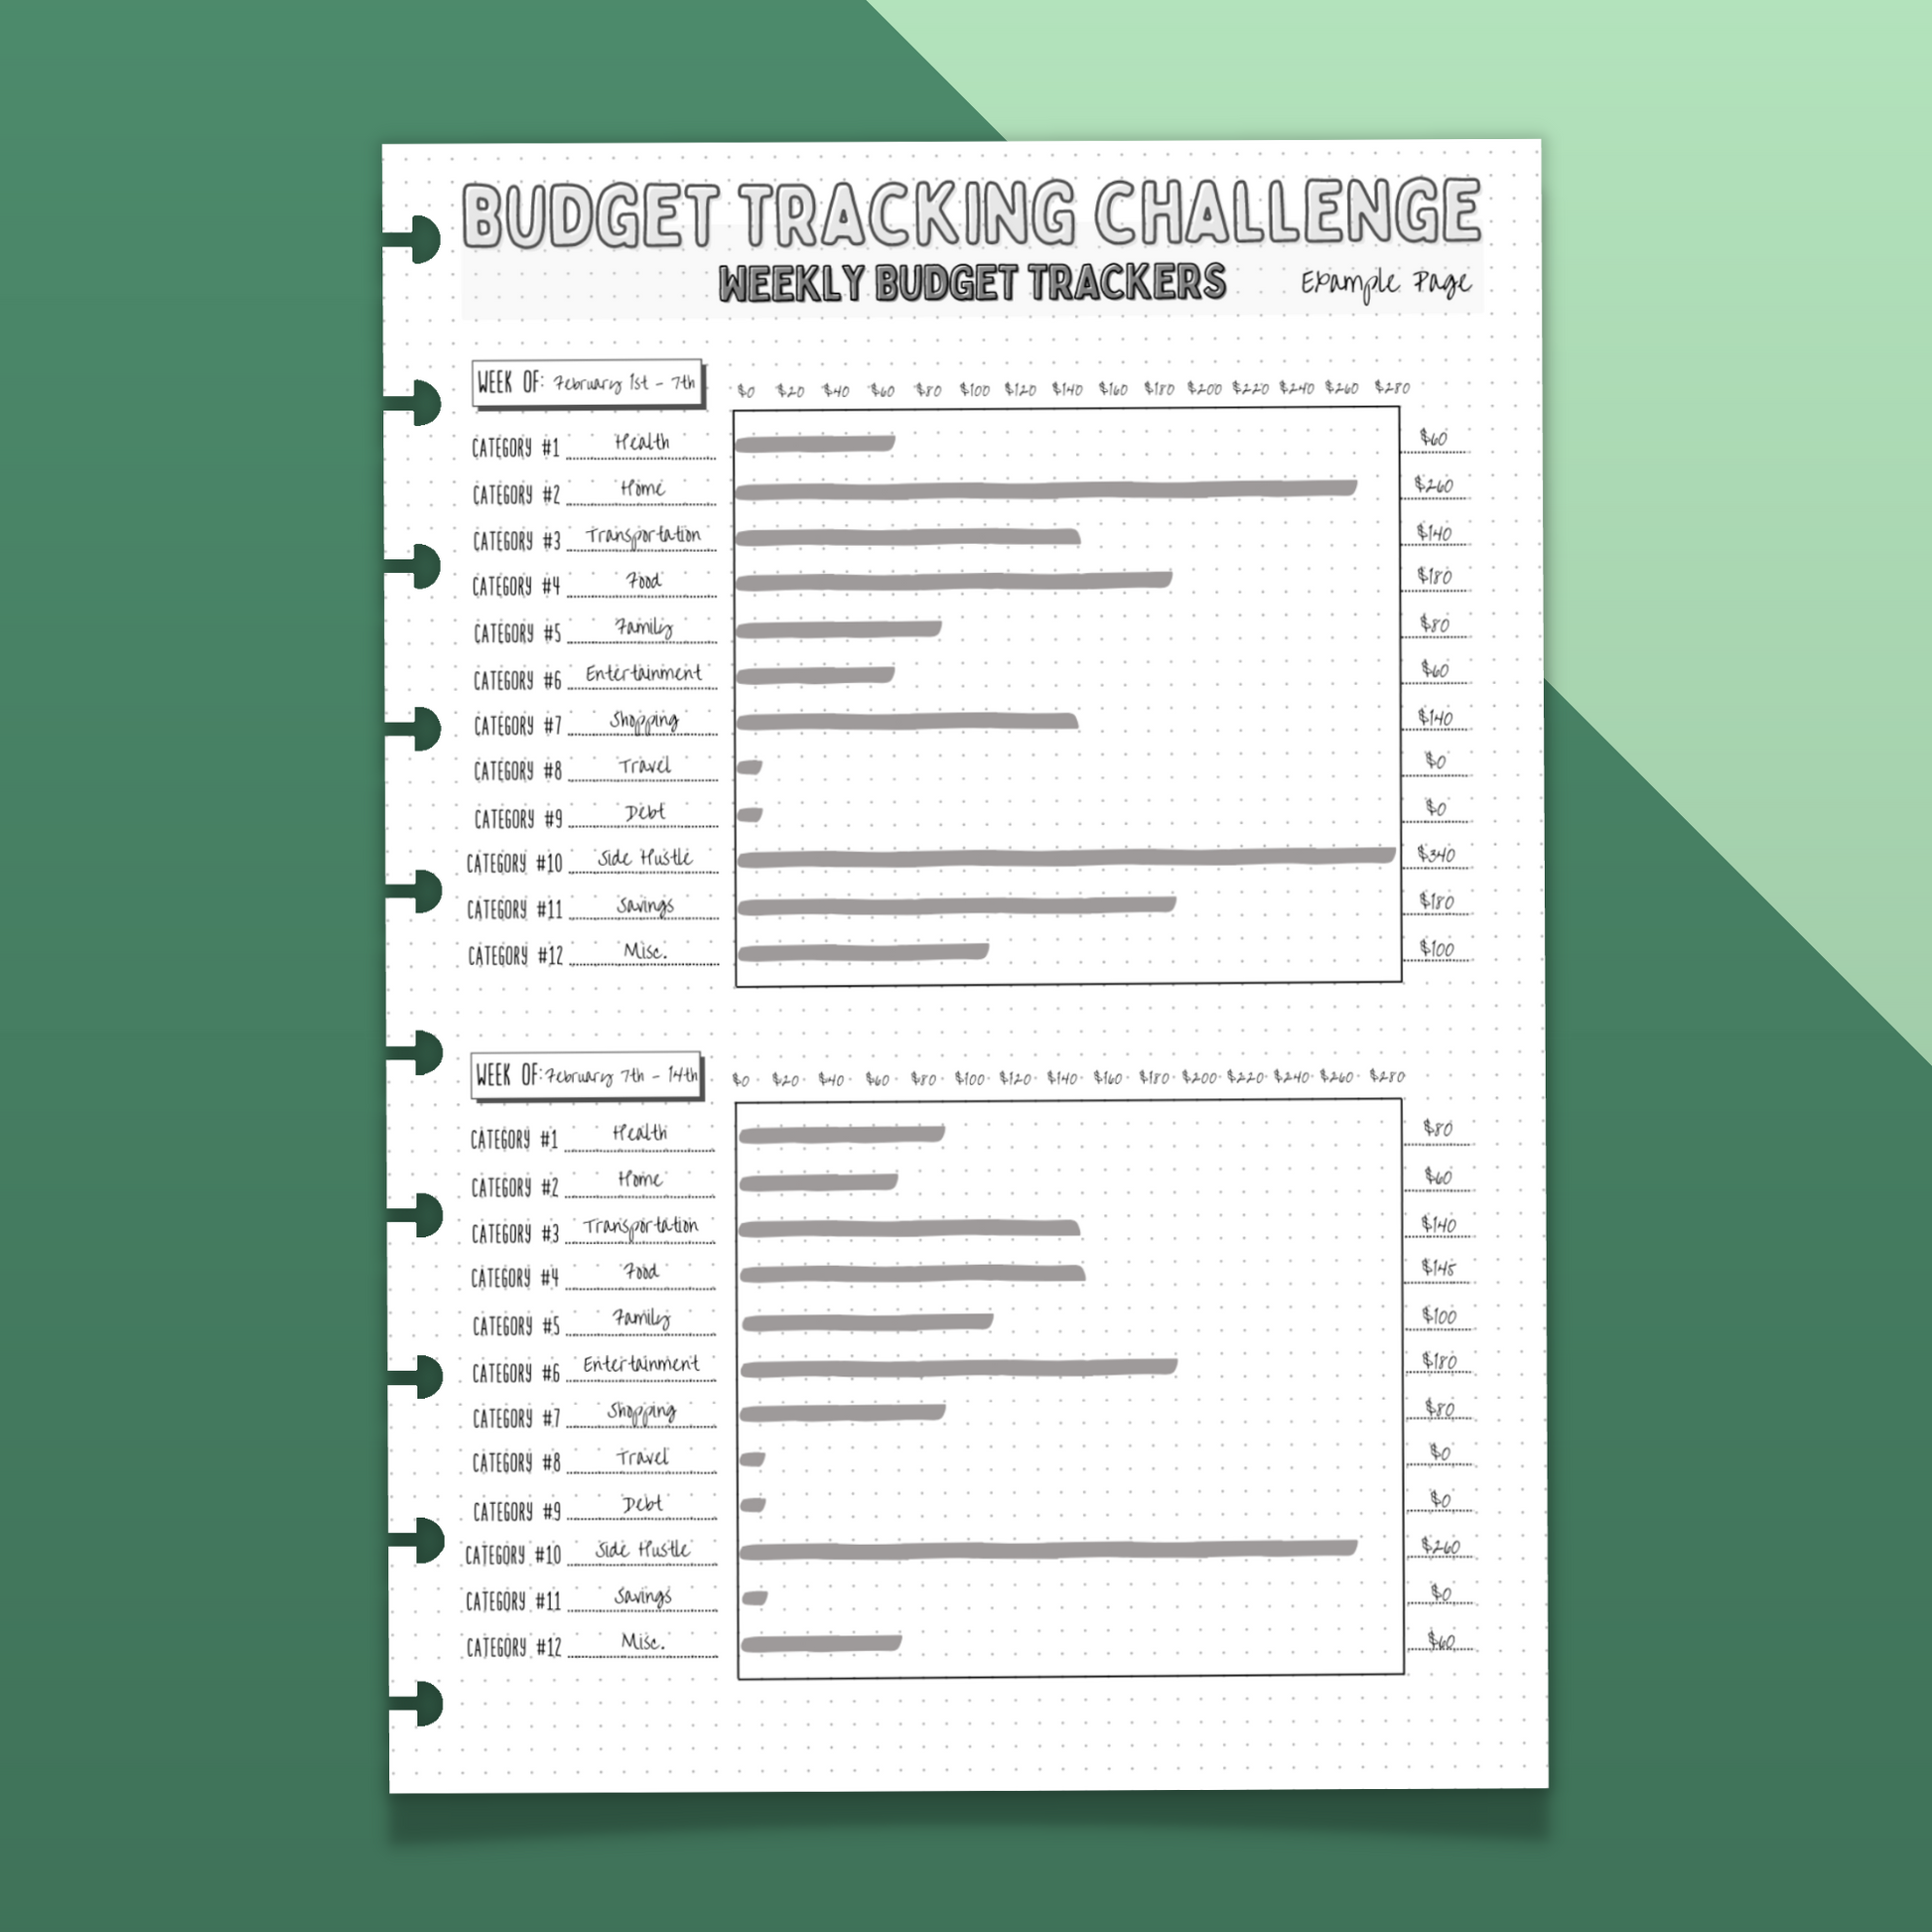 Preview of "Budget Tracking Challenge Weekly Budget Trackers Example Page"